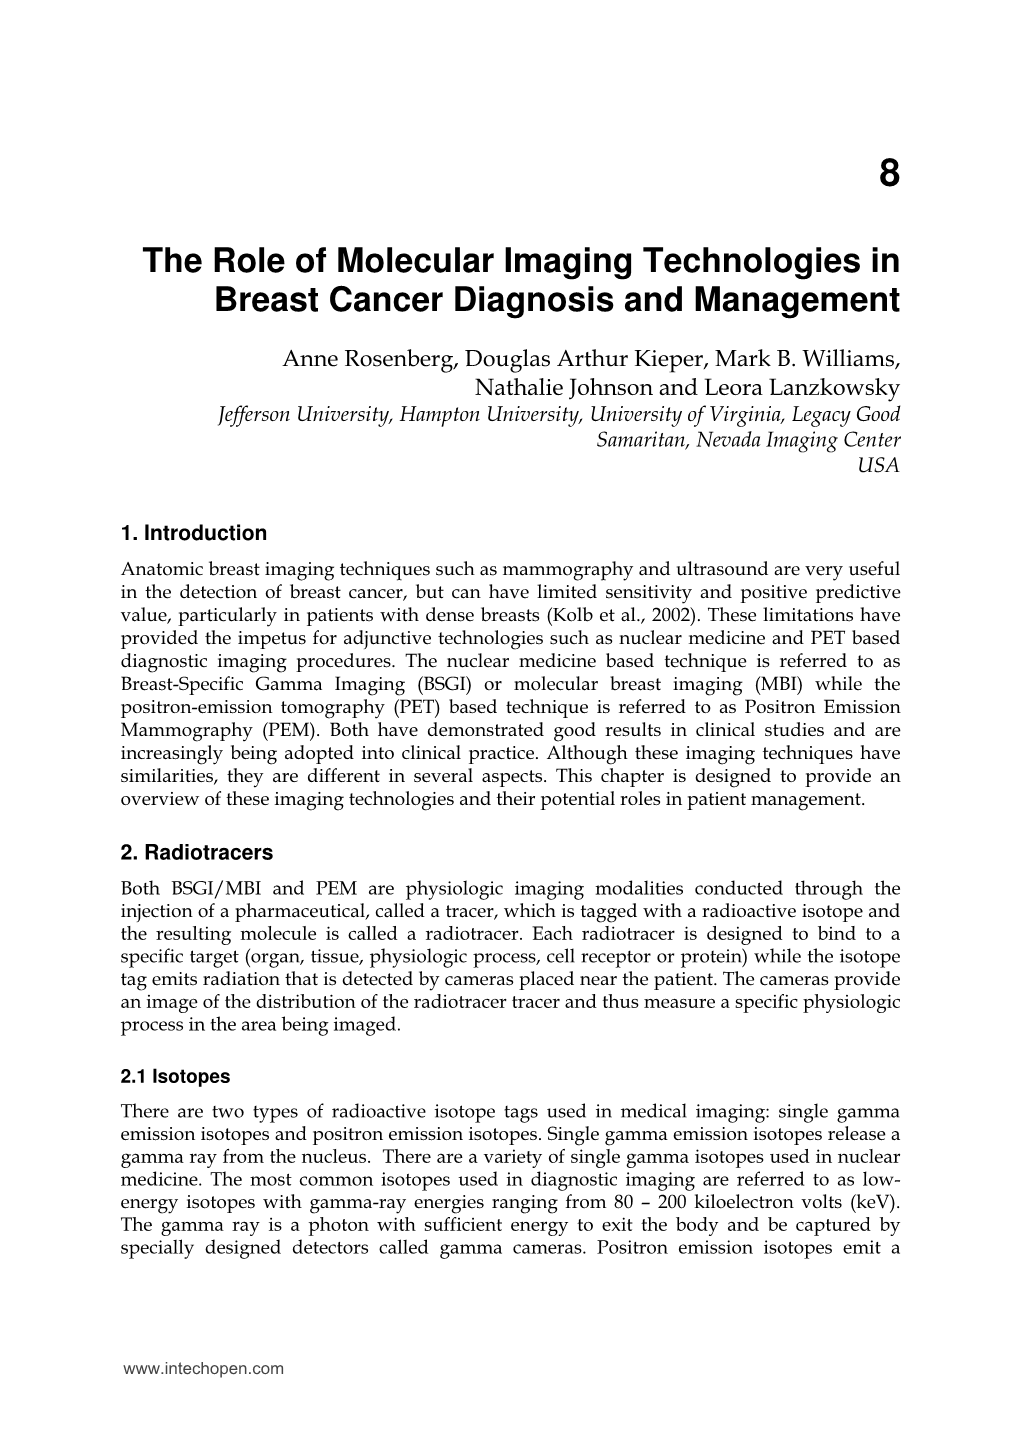 The Role of Molecular Imaging Technologies in Breast Cancer Diagnosis and Management